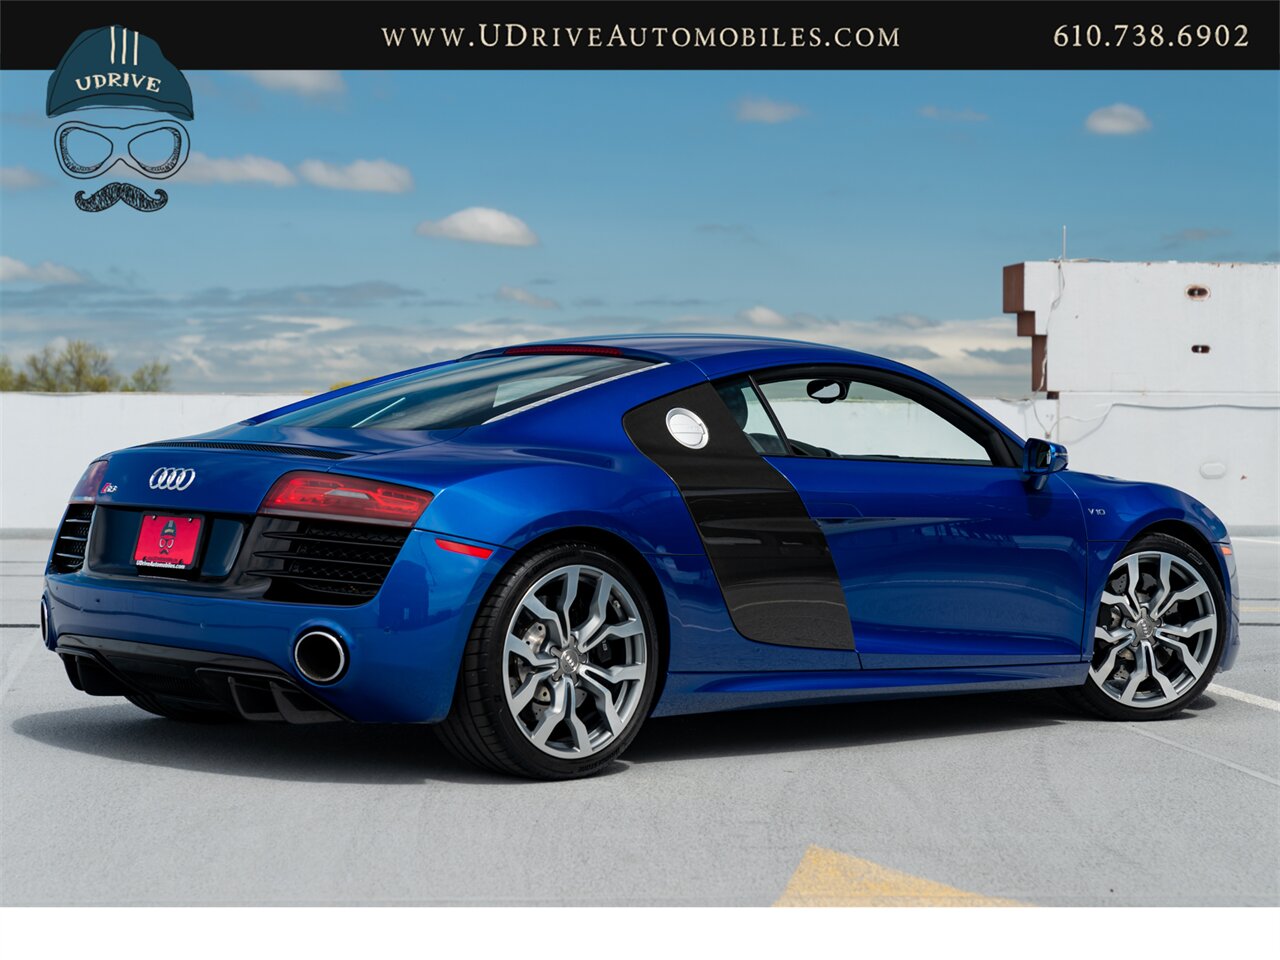 2015 Audi R8 5.2 V10 Quattro 6 Speed Manual 10k Miles  Diamond Stitched Leather 1 of 2 - Photo 2 - West Chester, PA 19382